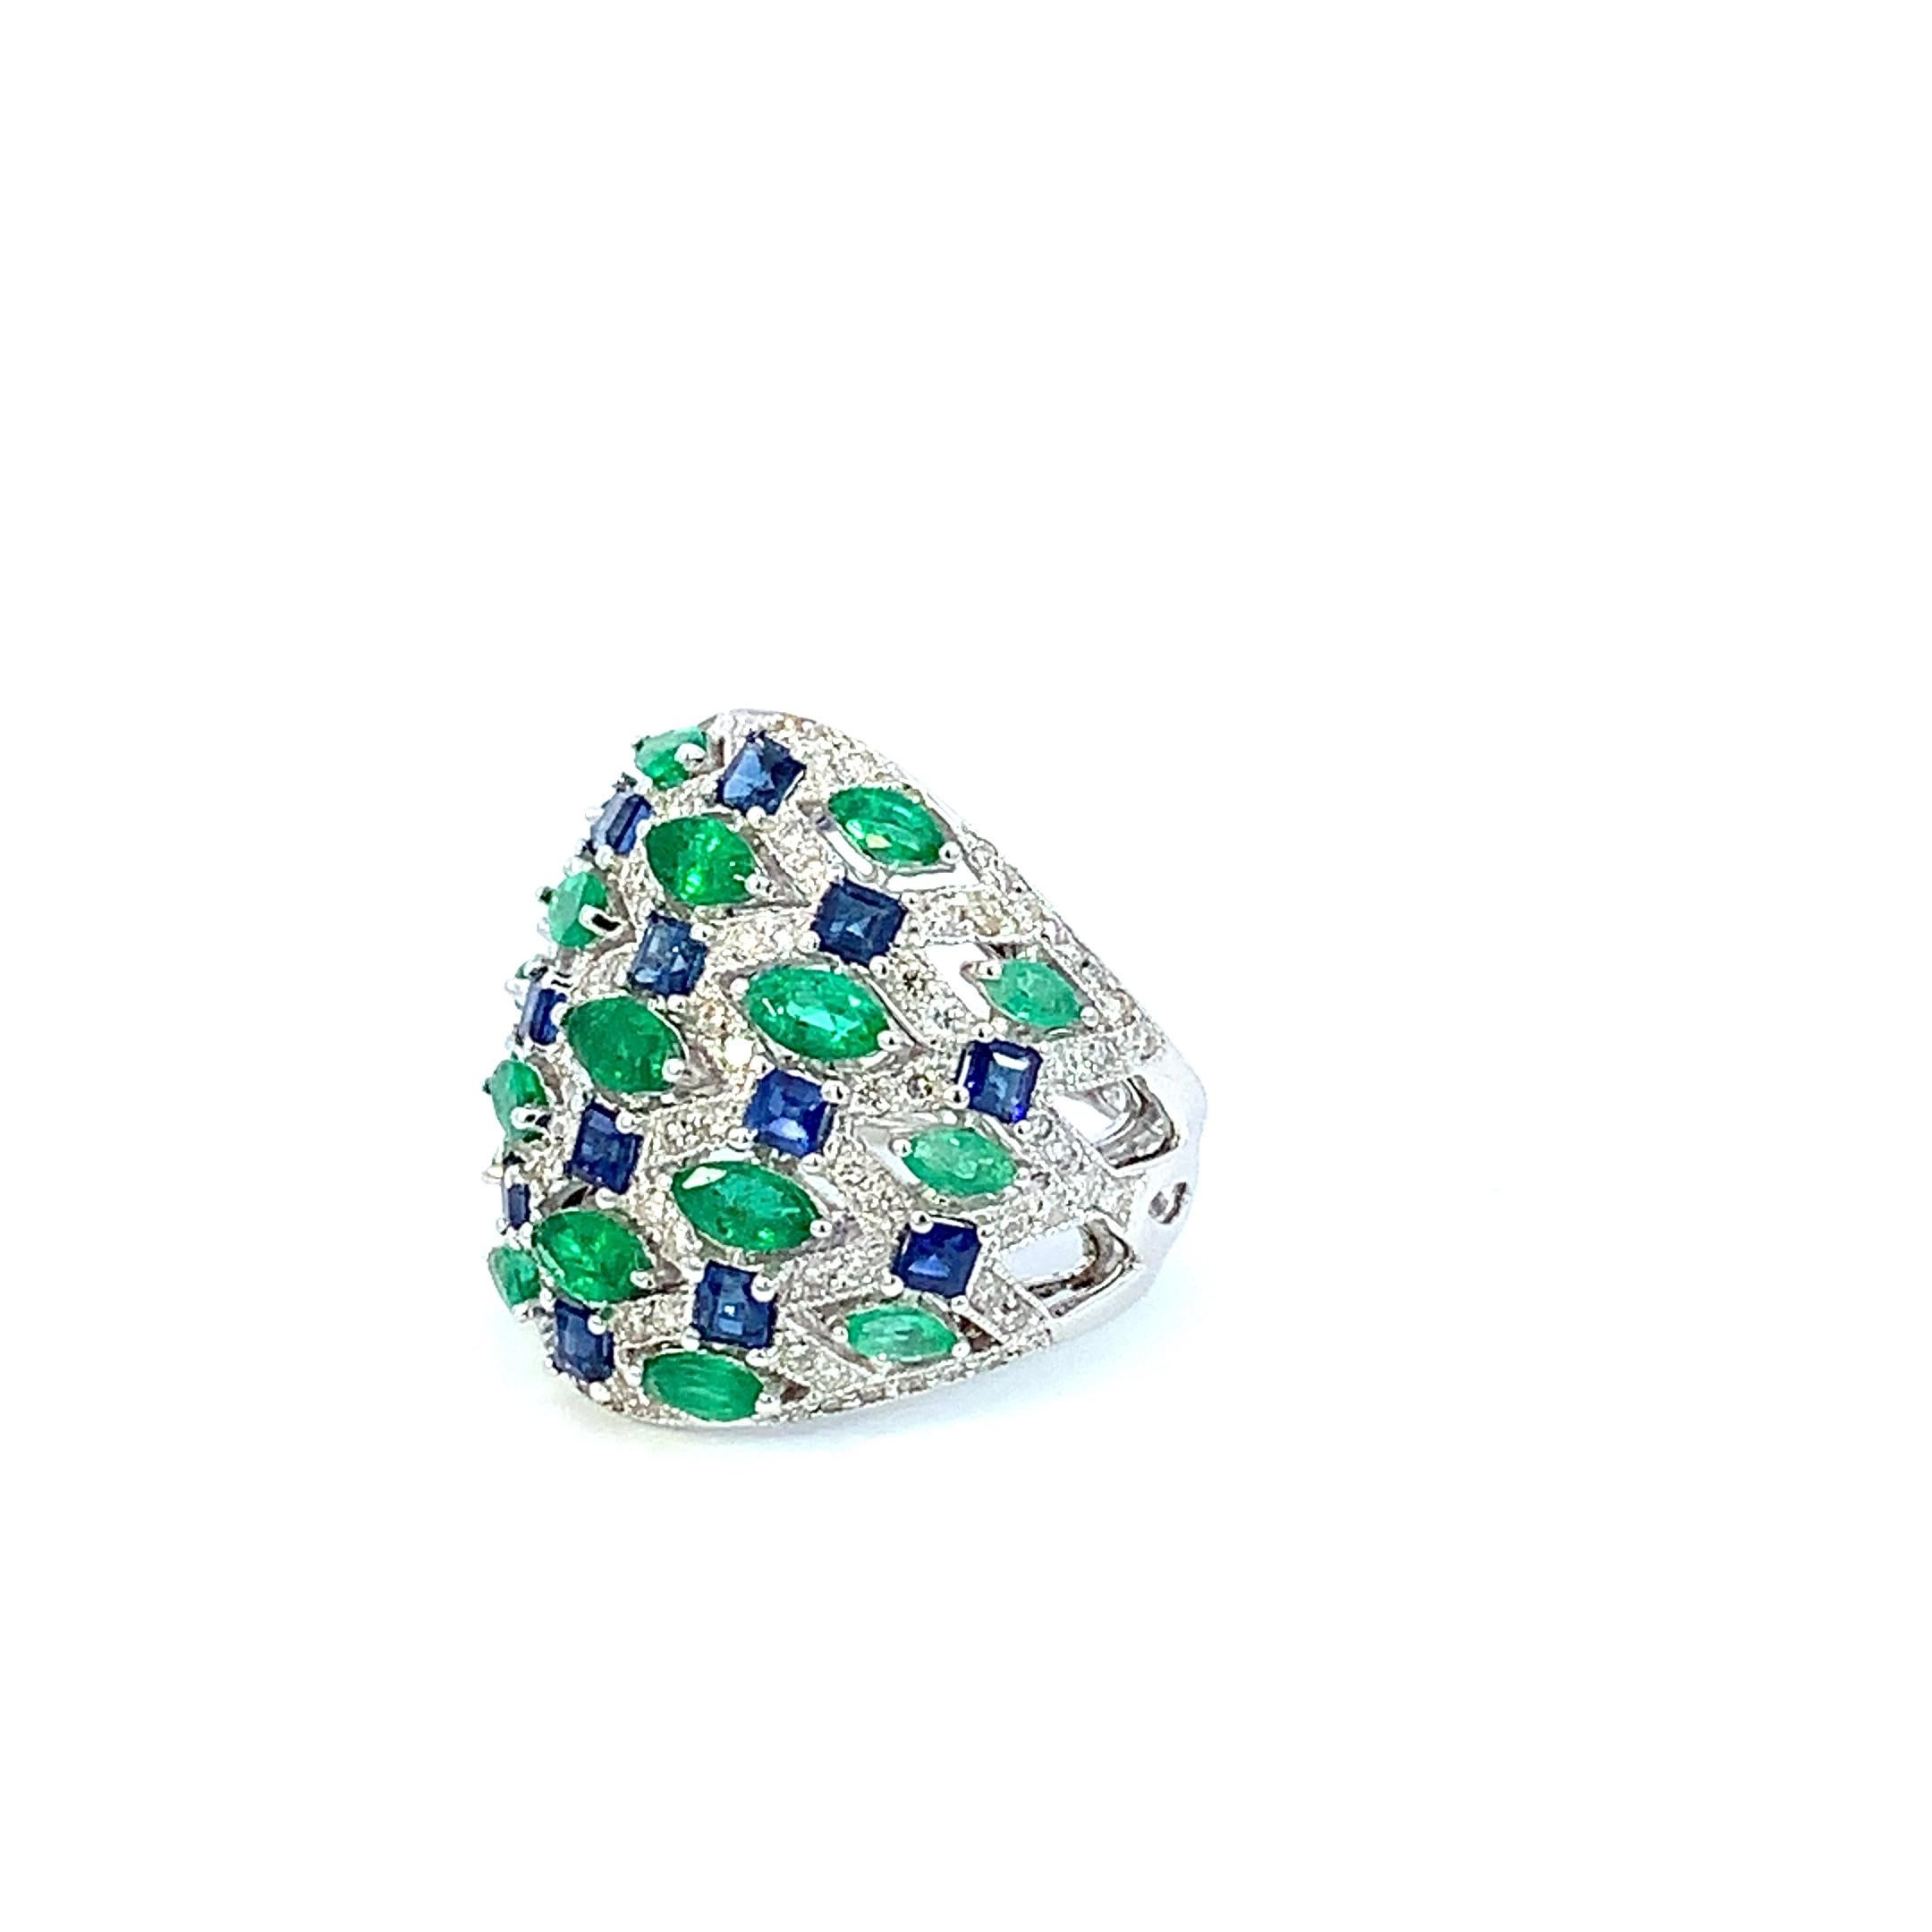 Marquise Cut White Diamond 1.4 Carat, Emerald, & Sapphire 2.80 Carats in 18K Gold RING For Sale